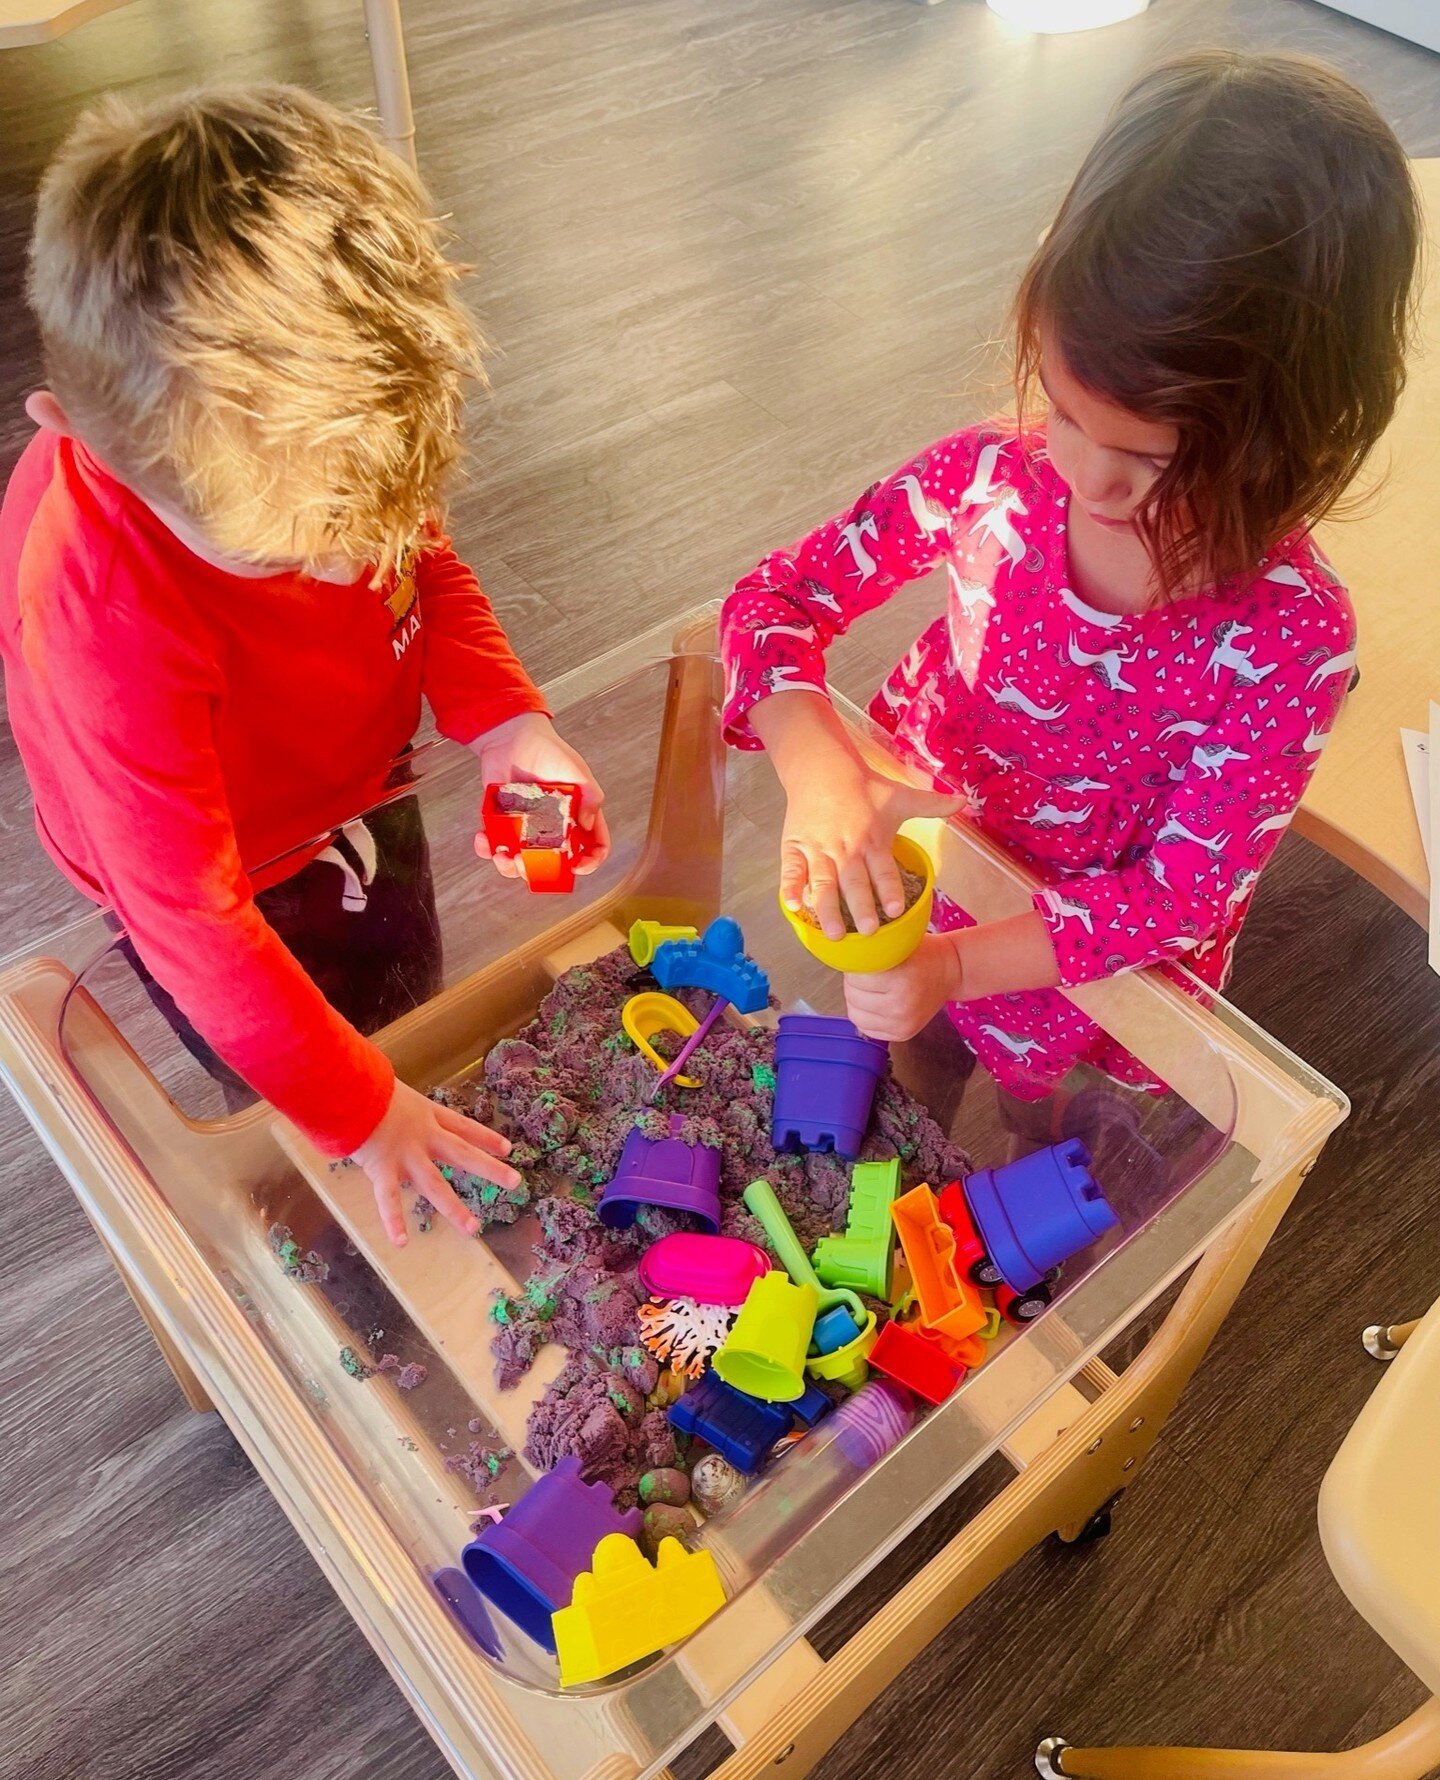 We 💙 using sensory bins at Keystone! ⁠
⁠
Sensory bins provide children with the opportunity to explore and learn through hands-on tactile play that engages their senses.⁠
⁠
⁠
⁠
#keystonechildcare #gallatintn #sensorybin #earlyeducation #christianday